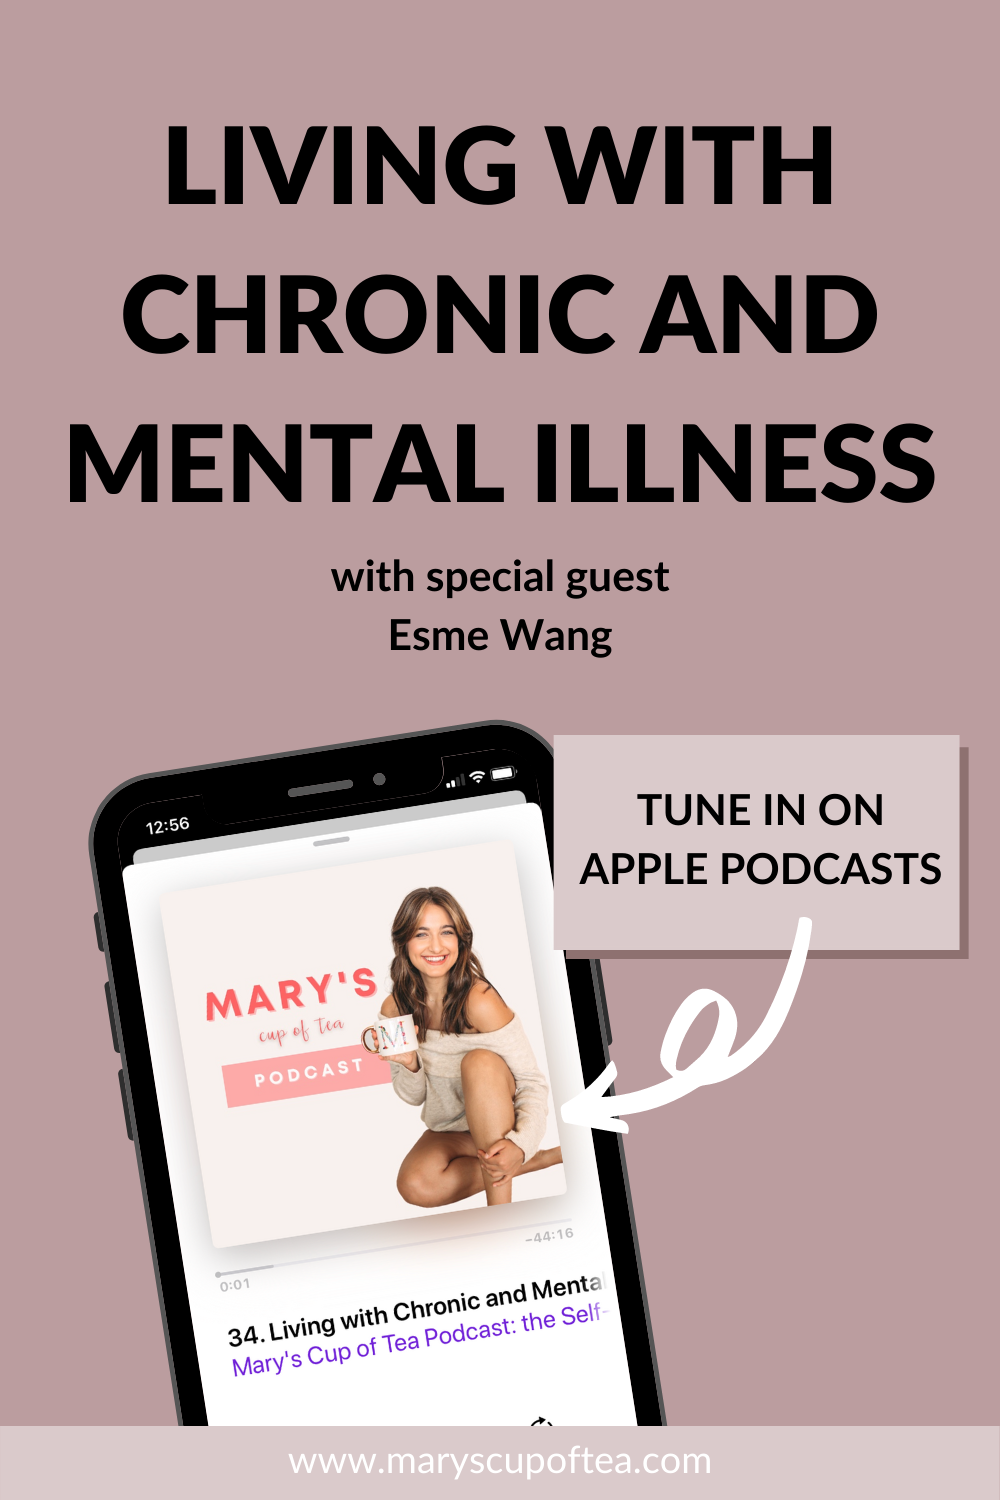 Living with chronic illness AND mental illness can be tough. In this episode of the Mary's Cup of Tea podcast, Mary interviews Esmé Wang about living with chronic and mental iollness, chronic and mental illness awareness, and more. Click through to tune in or search for Mary's Cup of Tea on Apple Podcasts!